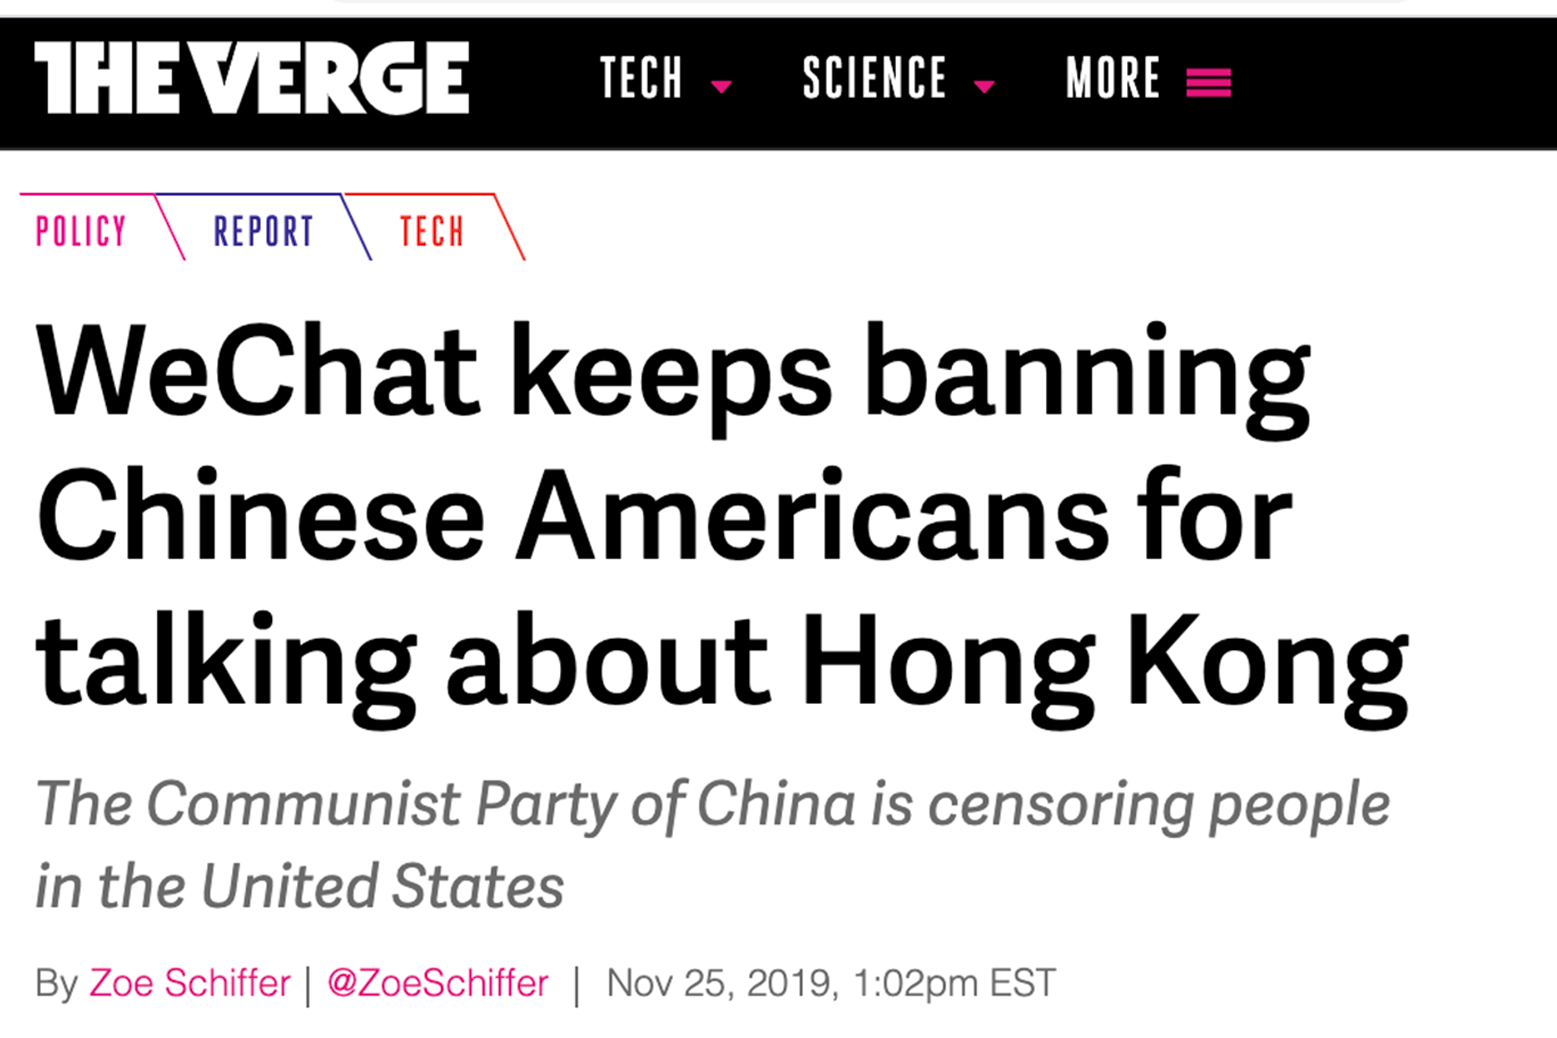 The Verge: WeChat keeps banning Chinese Americans for talking about Hong Kong